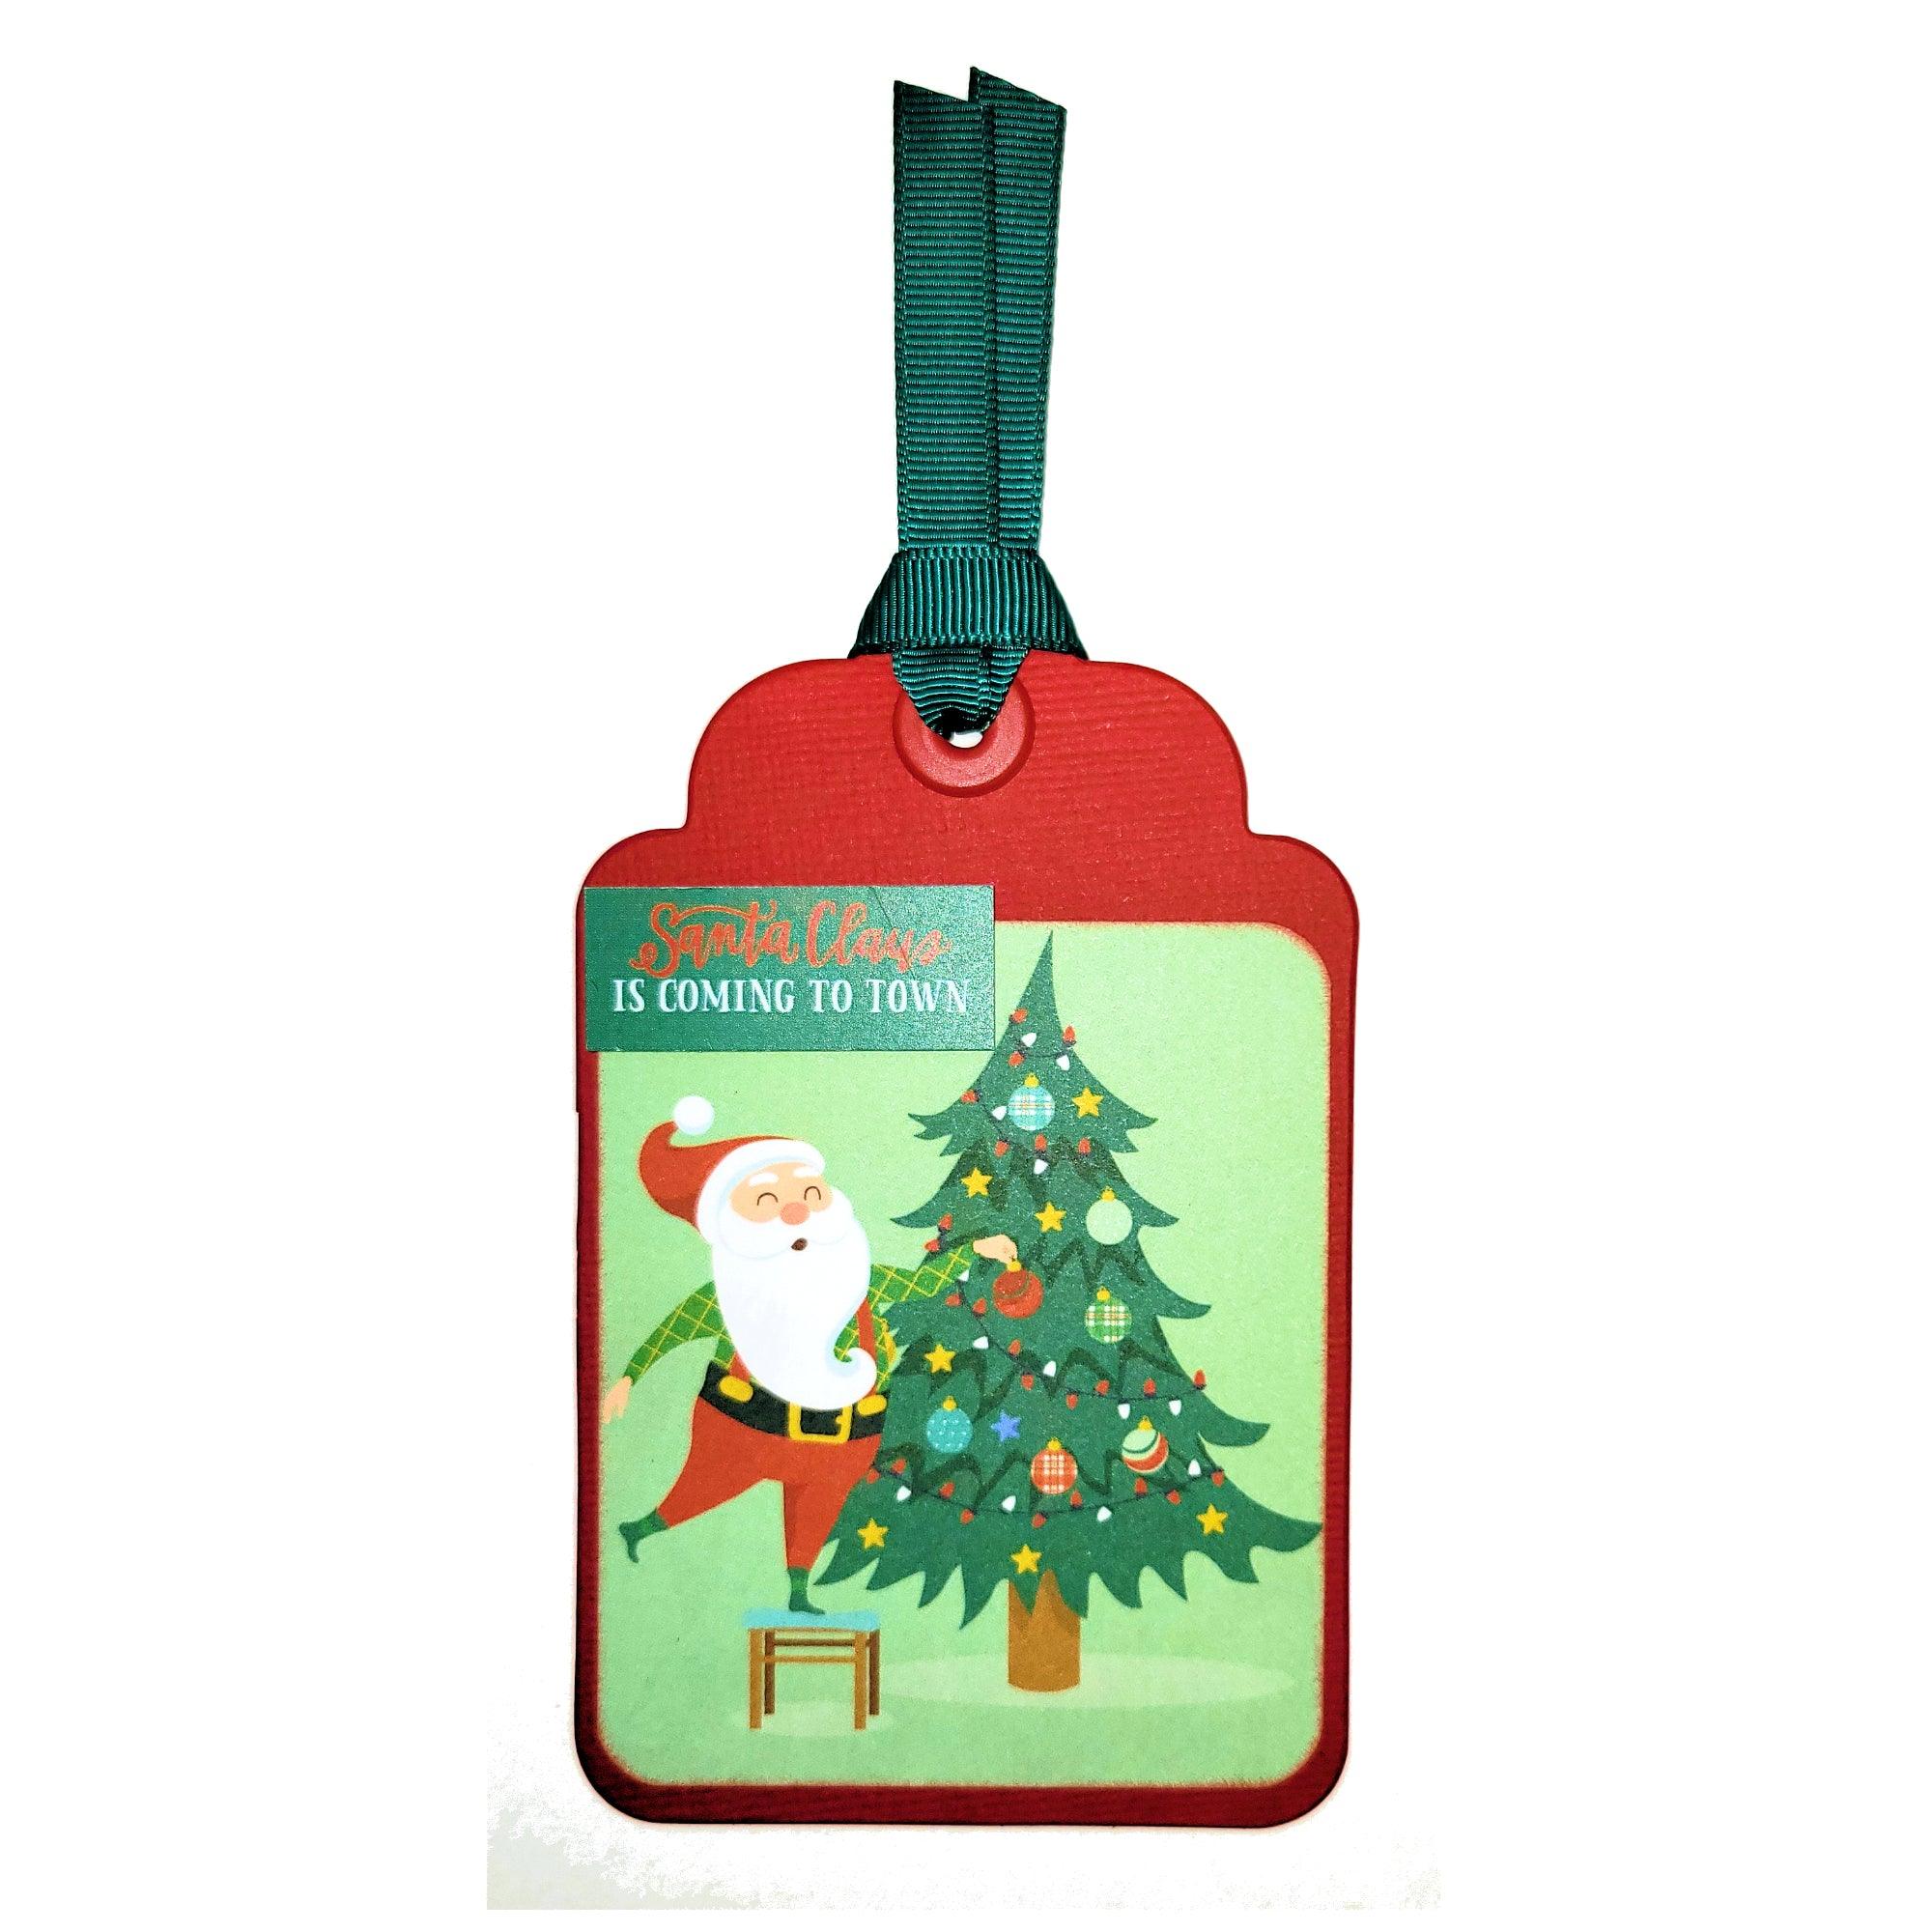 Christmas Collection Wishing You A Merry Christmas 3 x 4 Scrapbook Tag Embellishment by SSC Designs